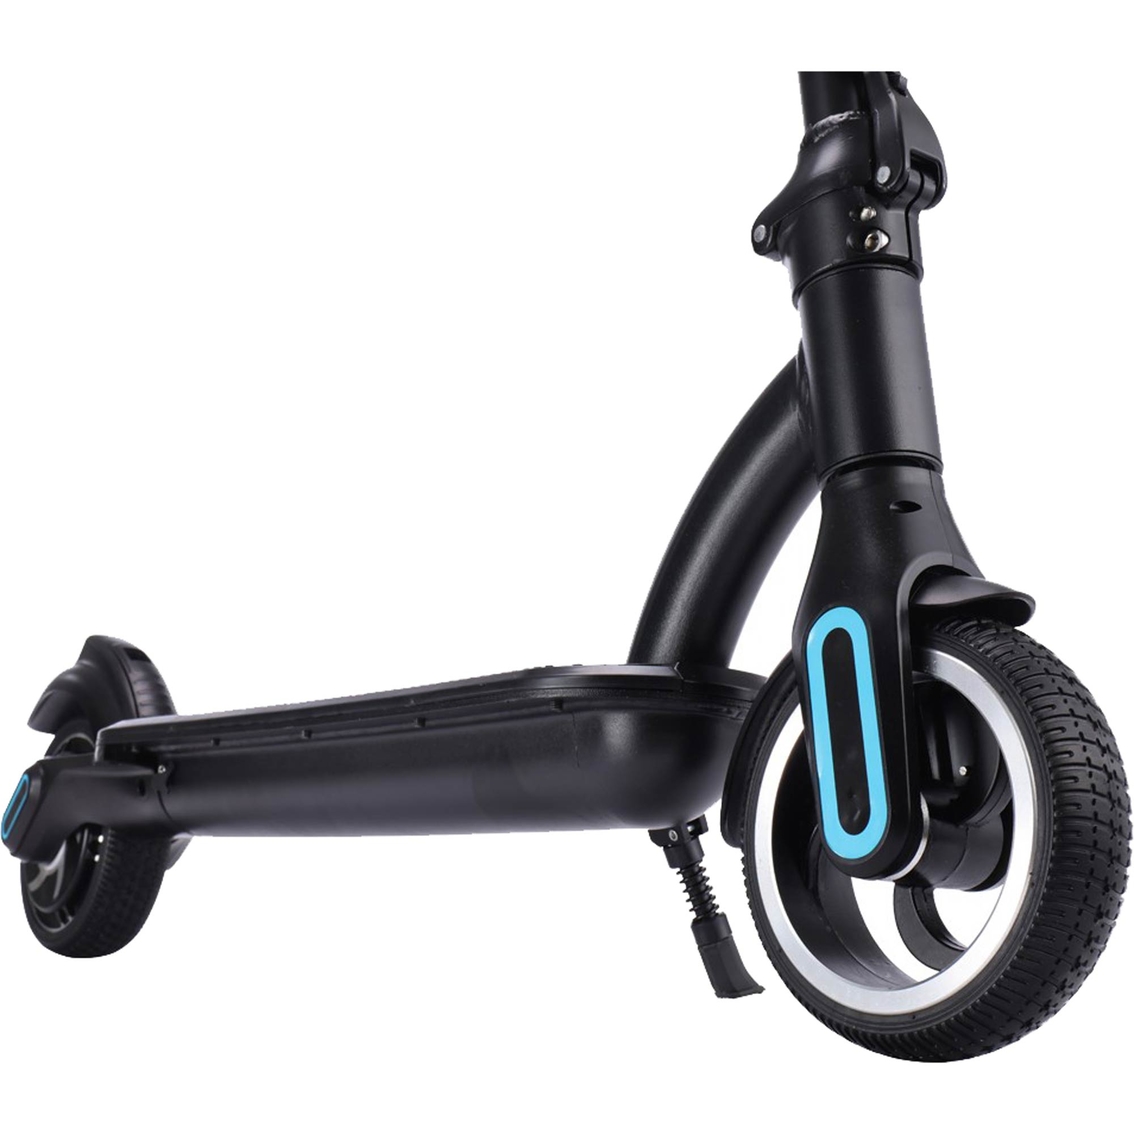 GlareWheel ES S8 Foldable Light Weight Electric Scooter - Image 4 of 8